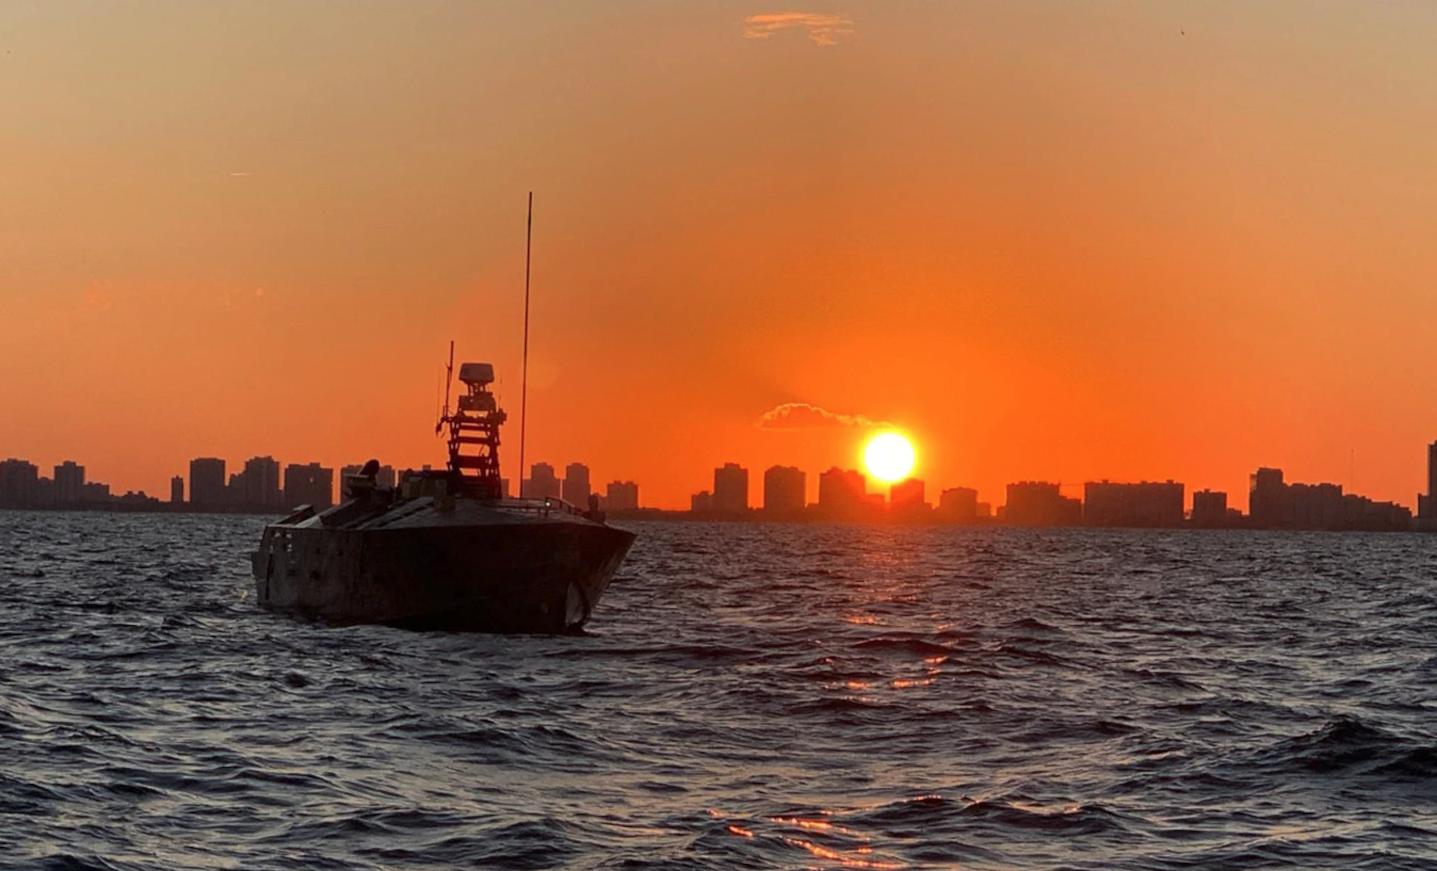 The Unmanned Influence Sweep System (UISS) heads offshore at sunrise for an Operational Assessment mission off the coast of South Florida in November 2019